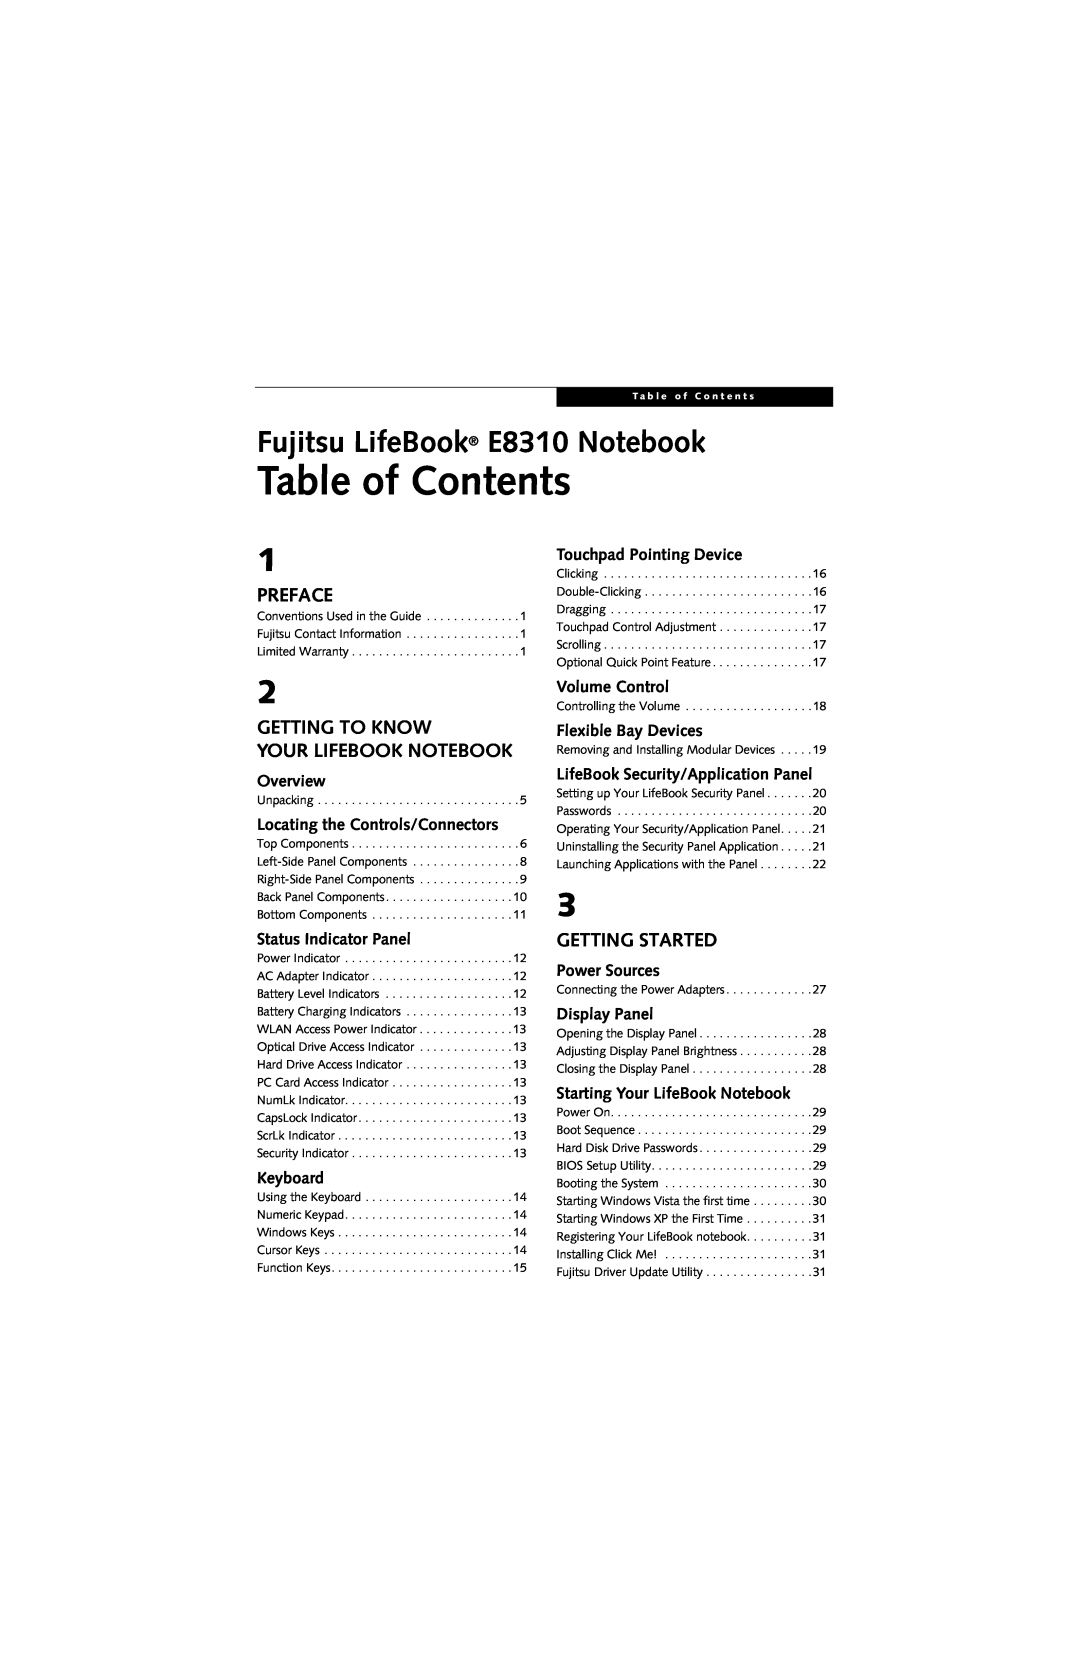 Fujitsu E8310 Table of Contents, Preface, Getting To Know Your Lifebook Notebook, Getting Started, Overview, Keyboard 